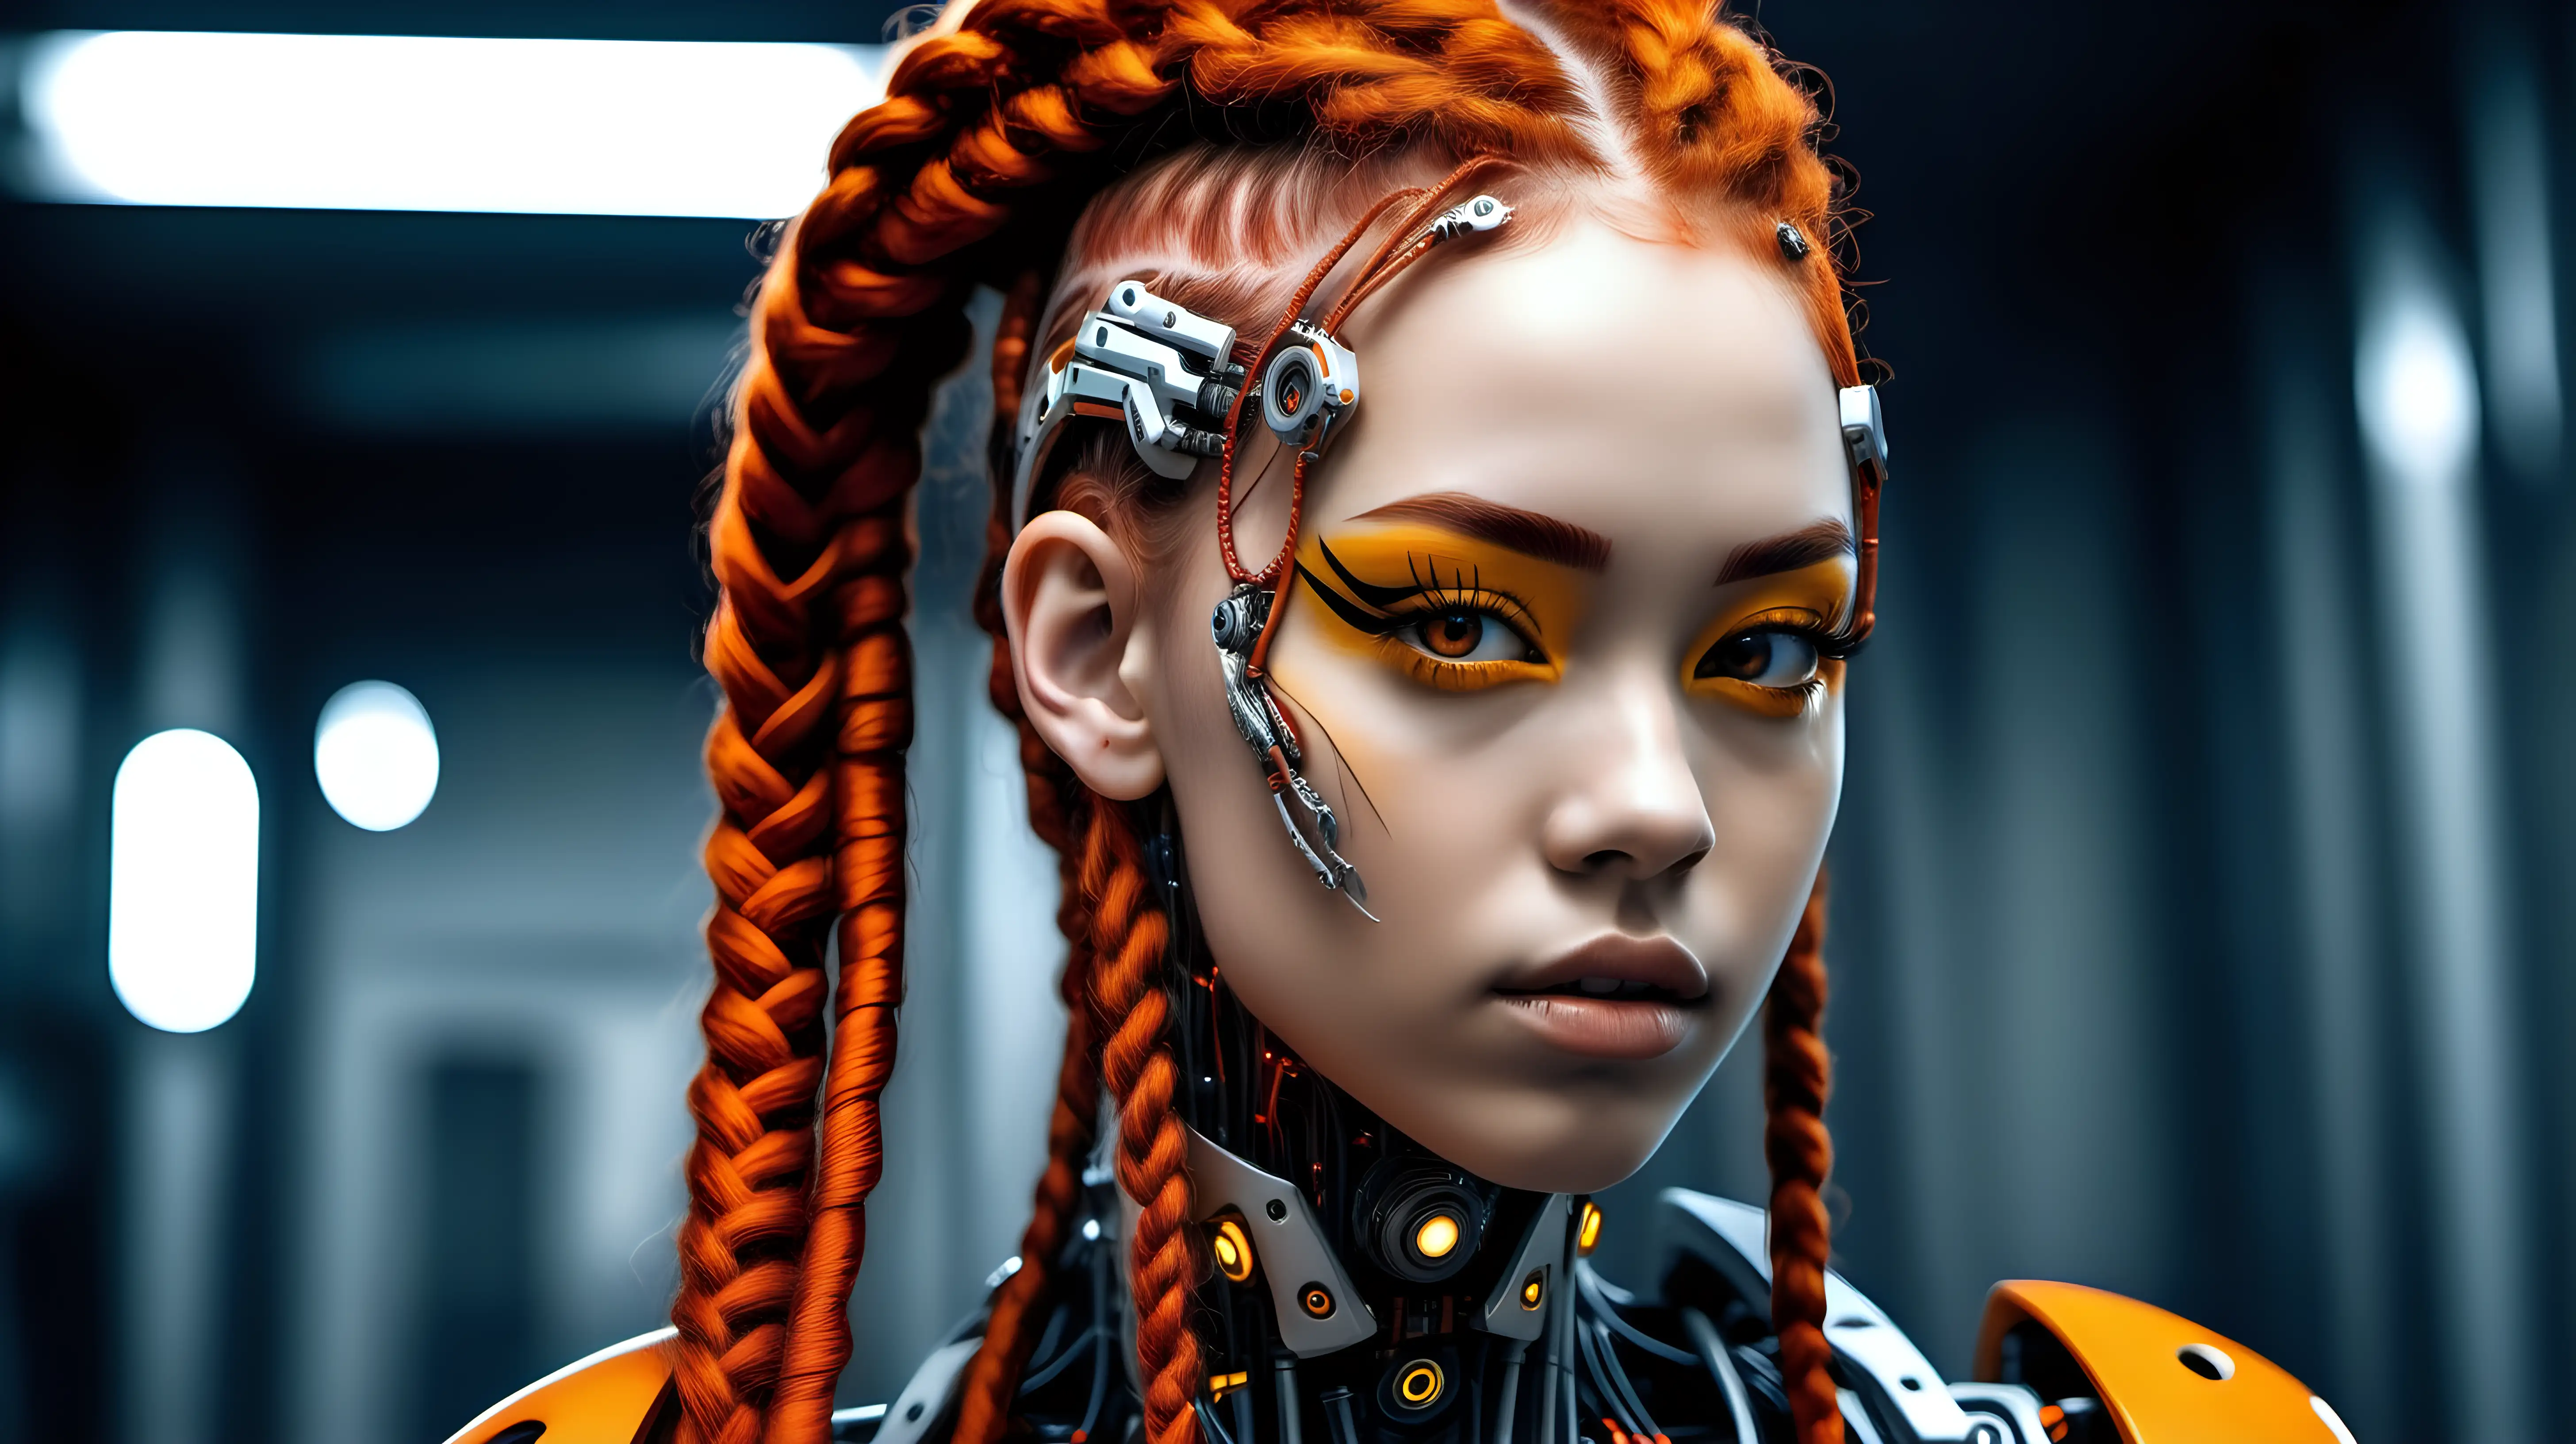 Gorgeous cyborg woman, 18 years old. She has a cyborg face, but she is extremely beautiful. Wild hair, futuristic braids. Red braids, yellow, braids, black braids. Many braids. European cyborg woman, white woman cyborg. Orange